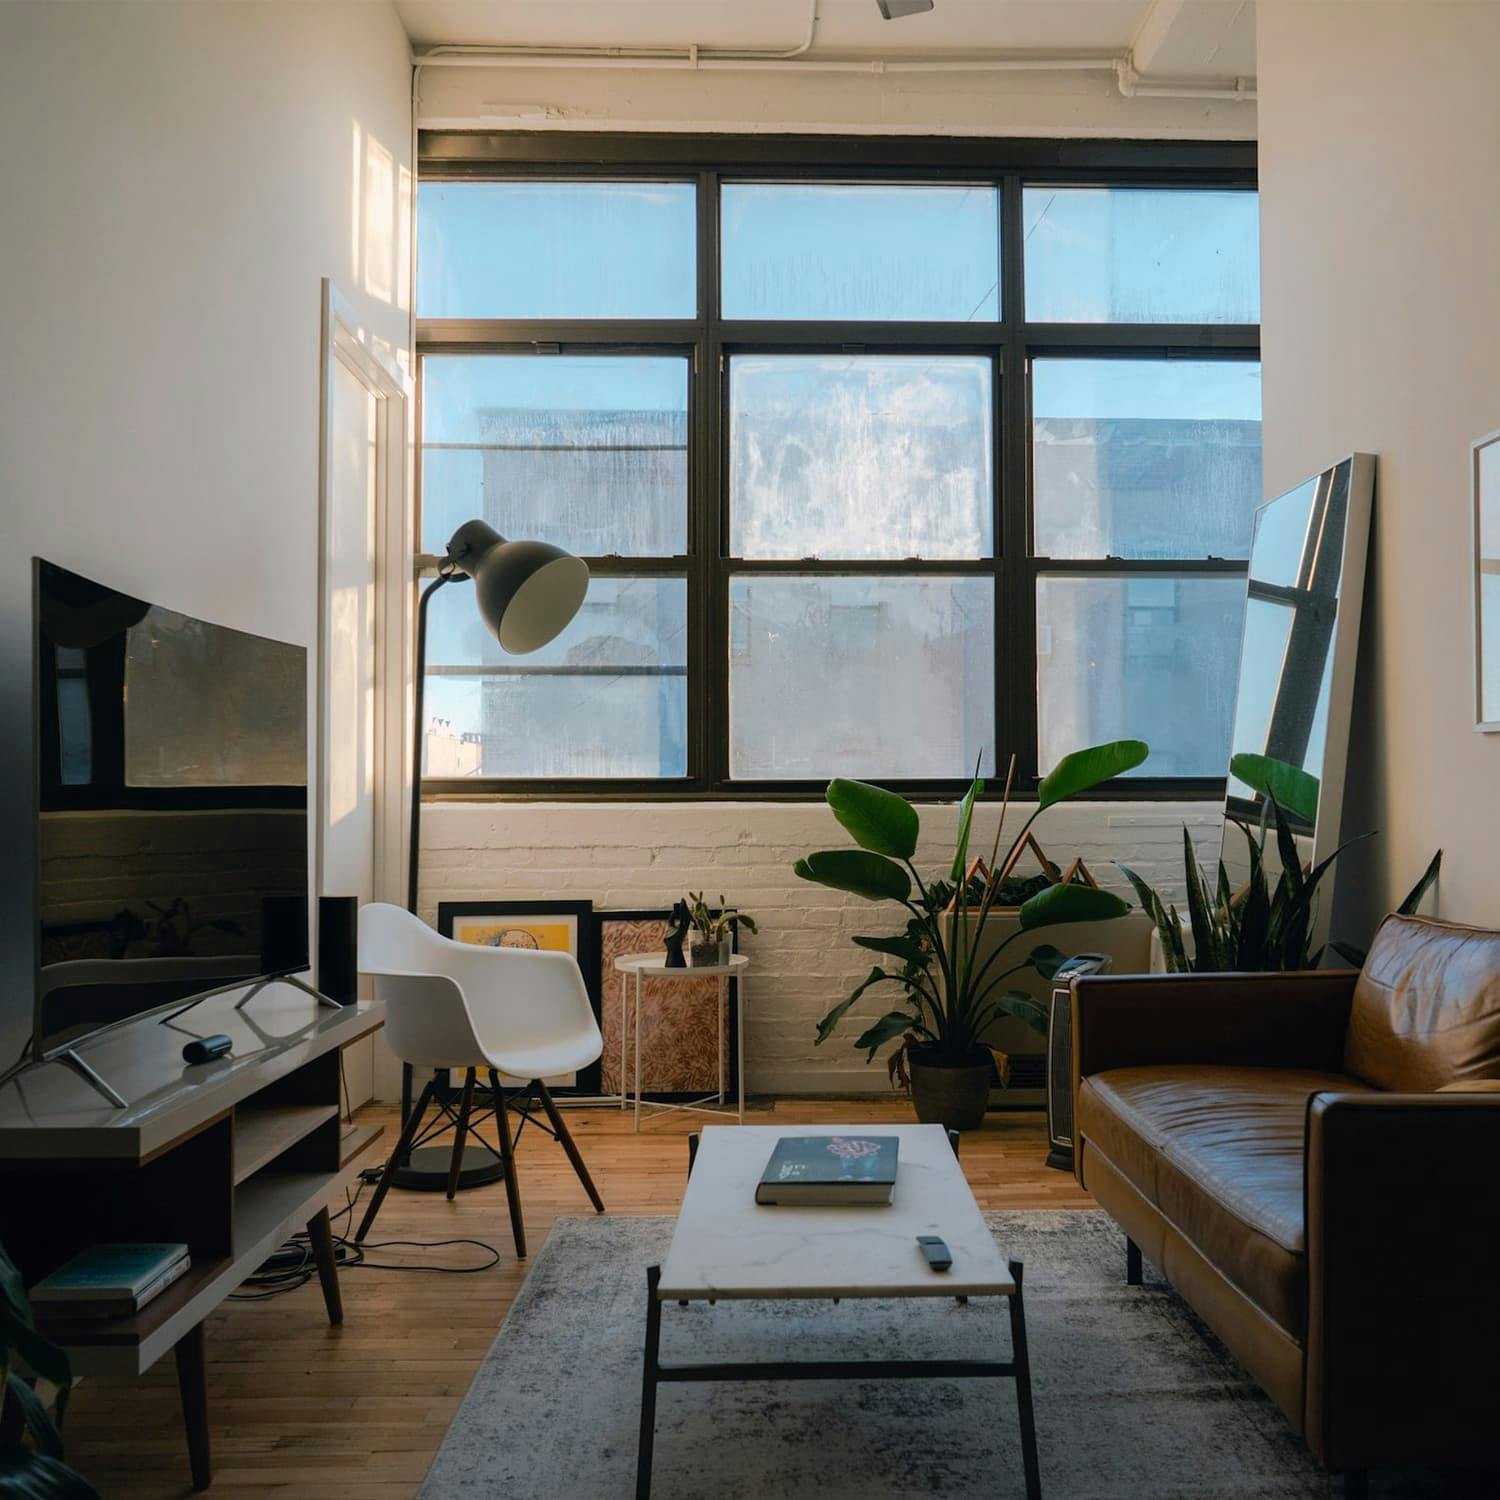 Picture of a cozy looking city apartment interior.